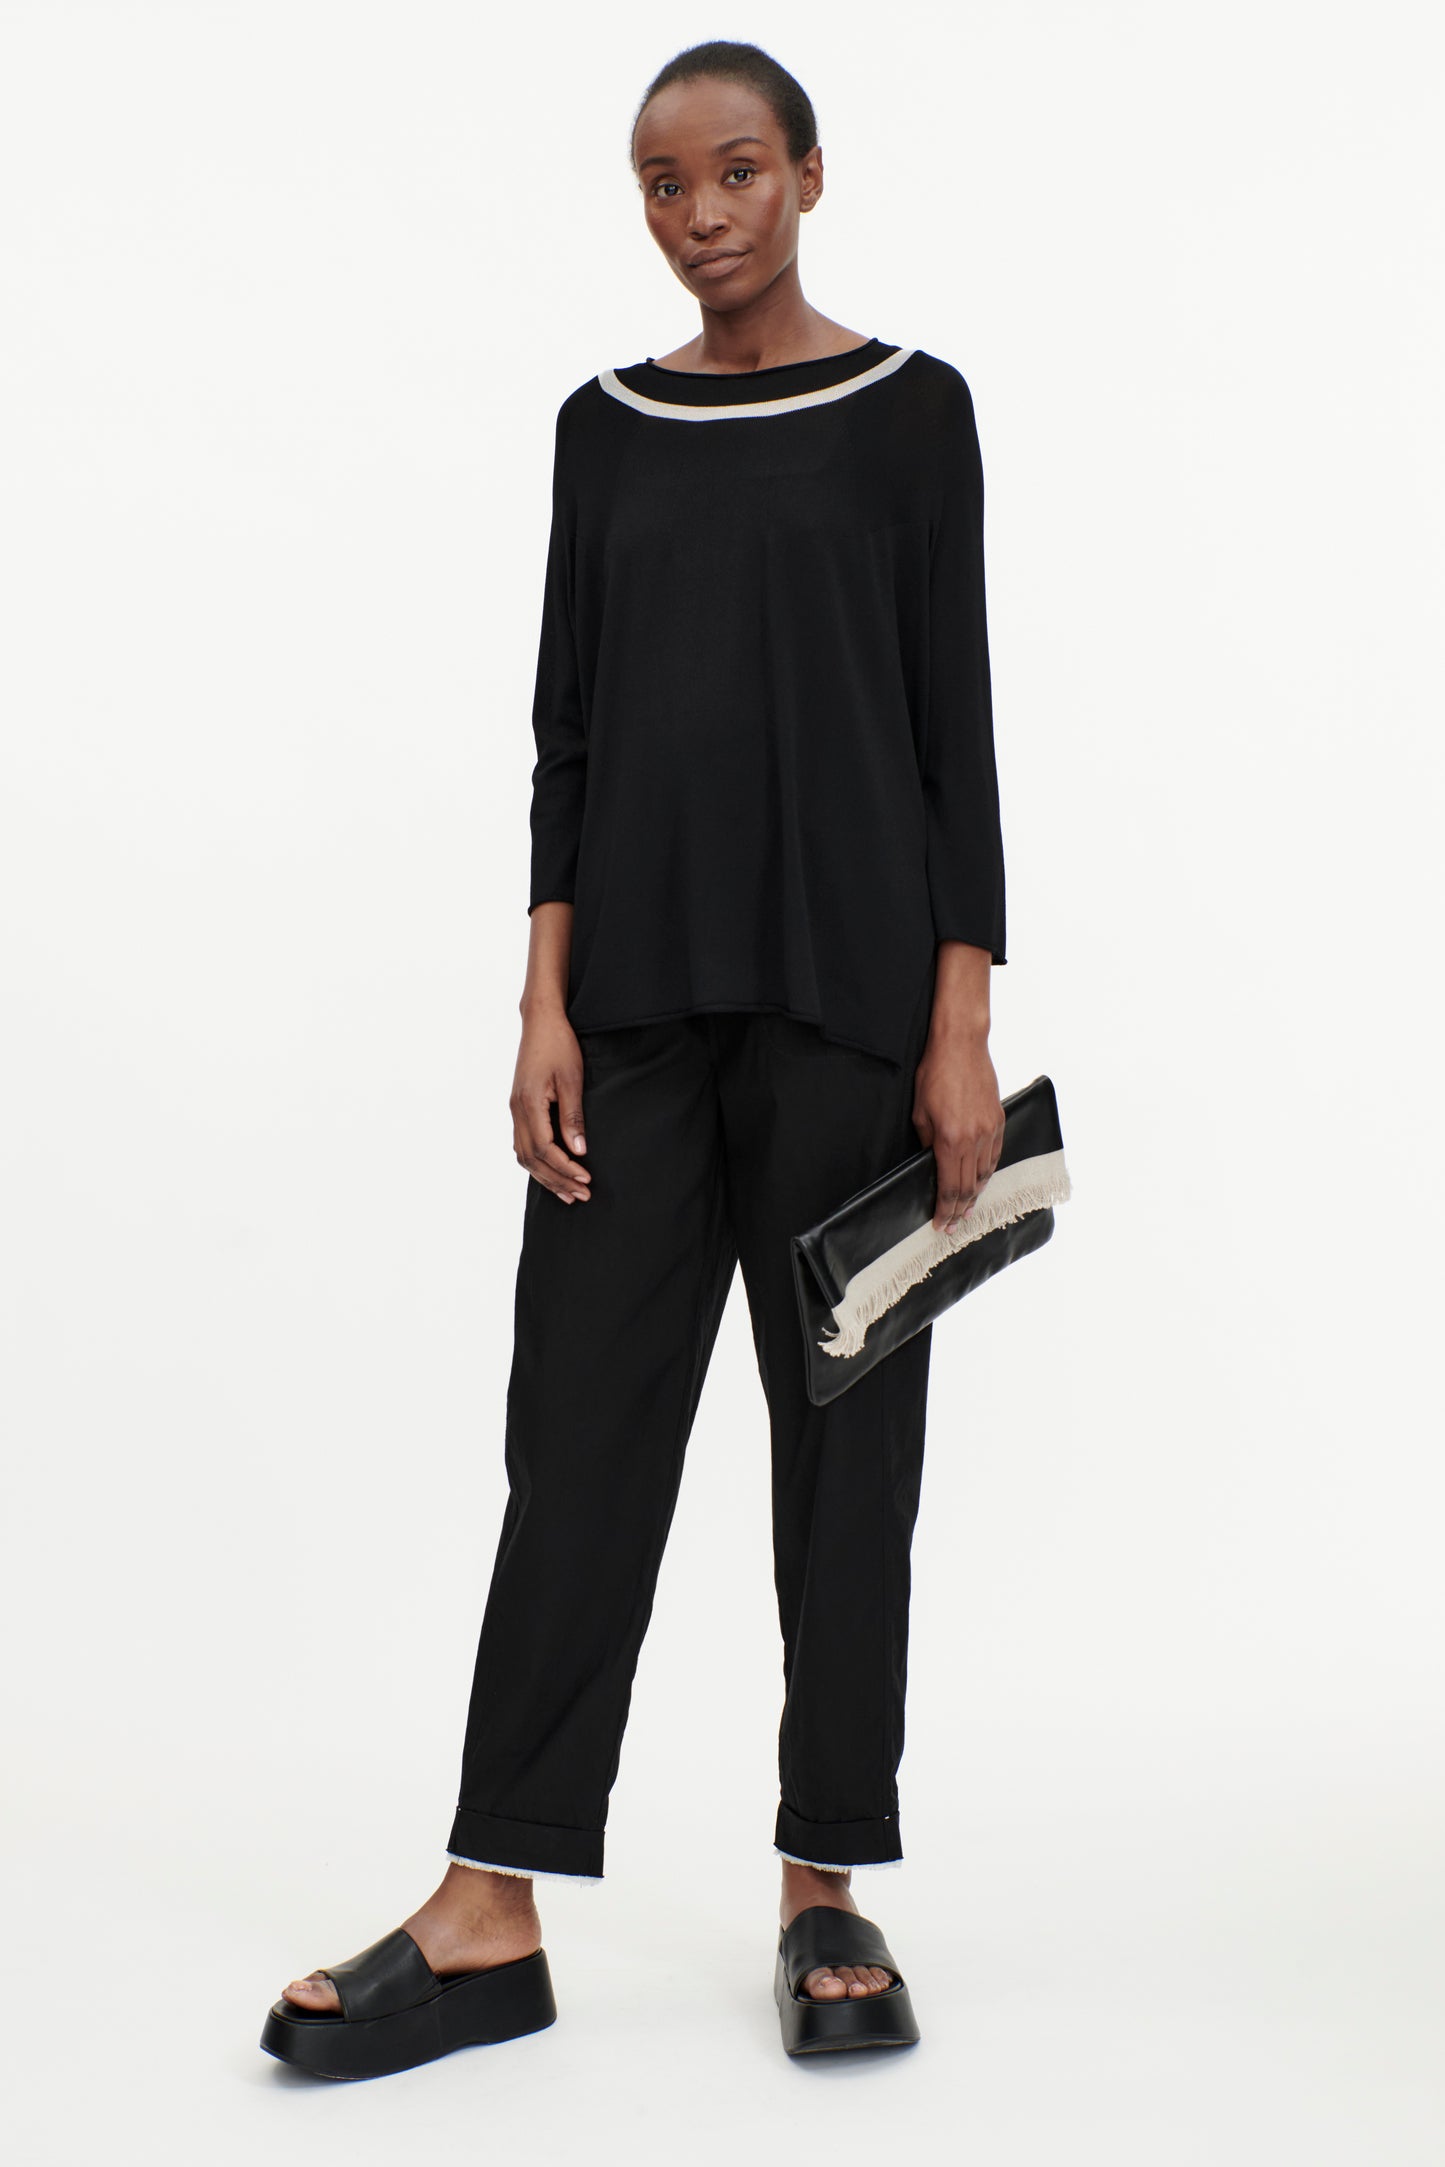 Wink Black Top With Neck detail